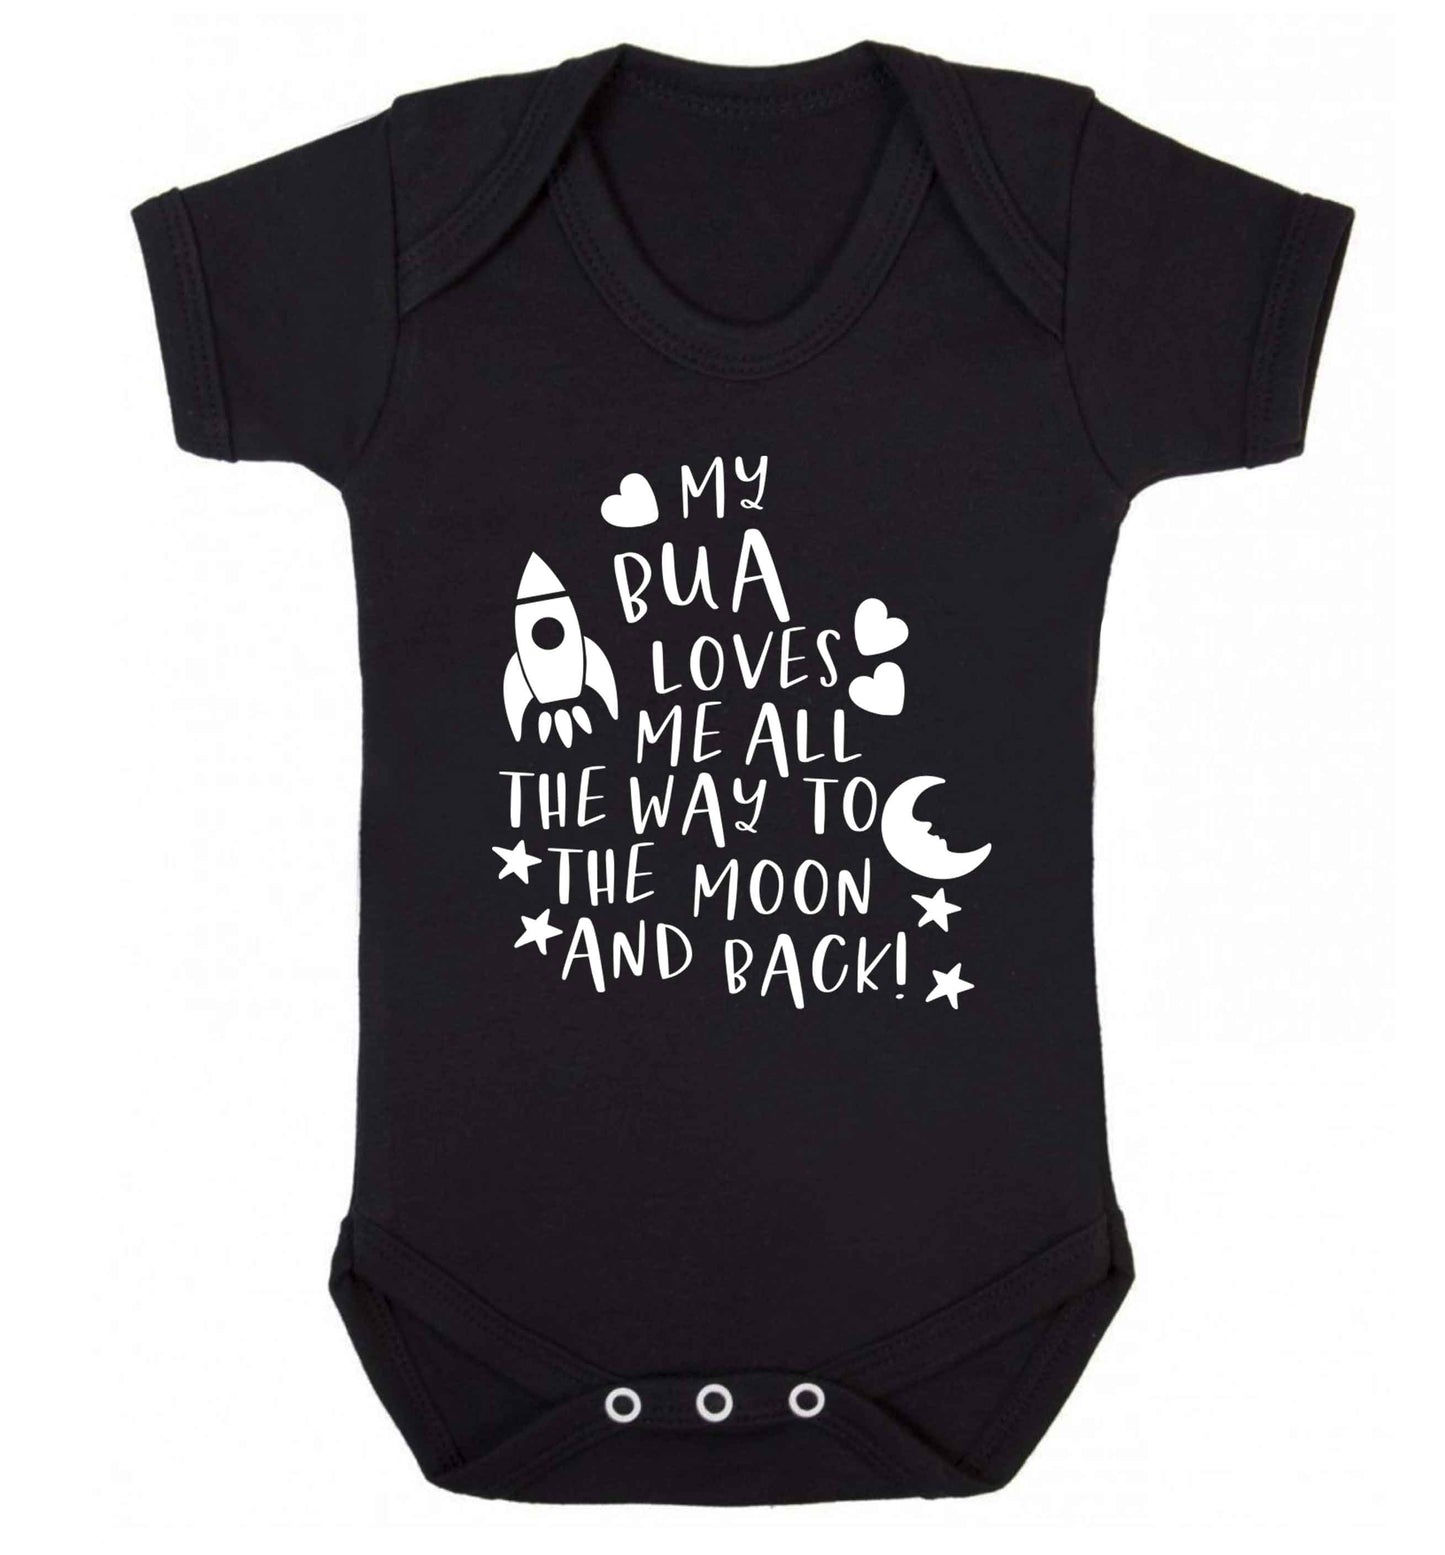 My bua loves me all they way to the moon and back Baby Vest black 18-24 months